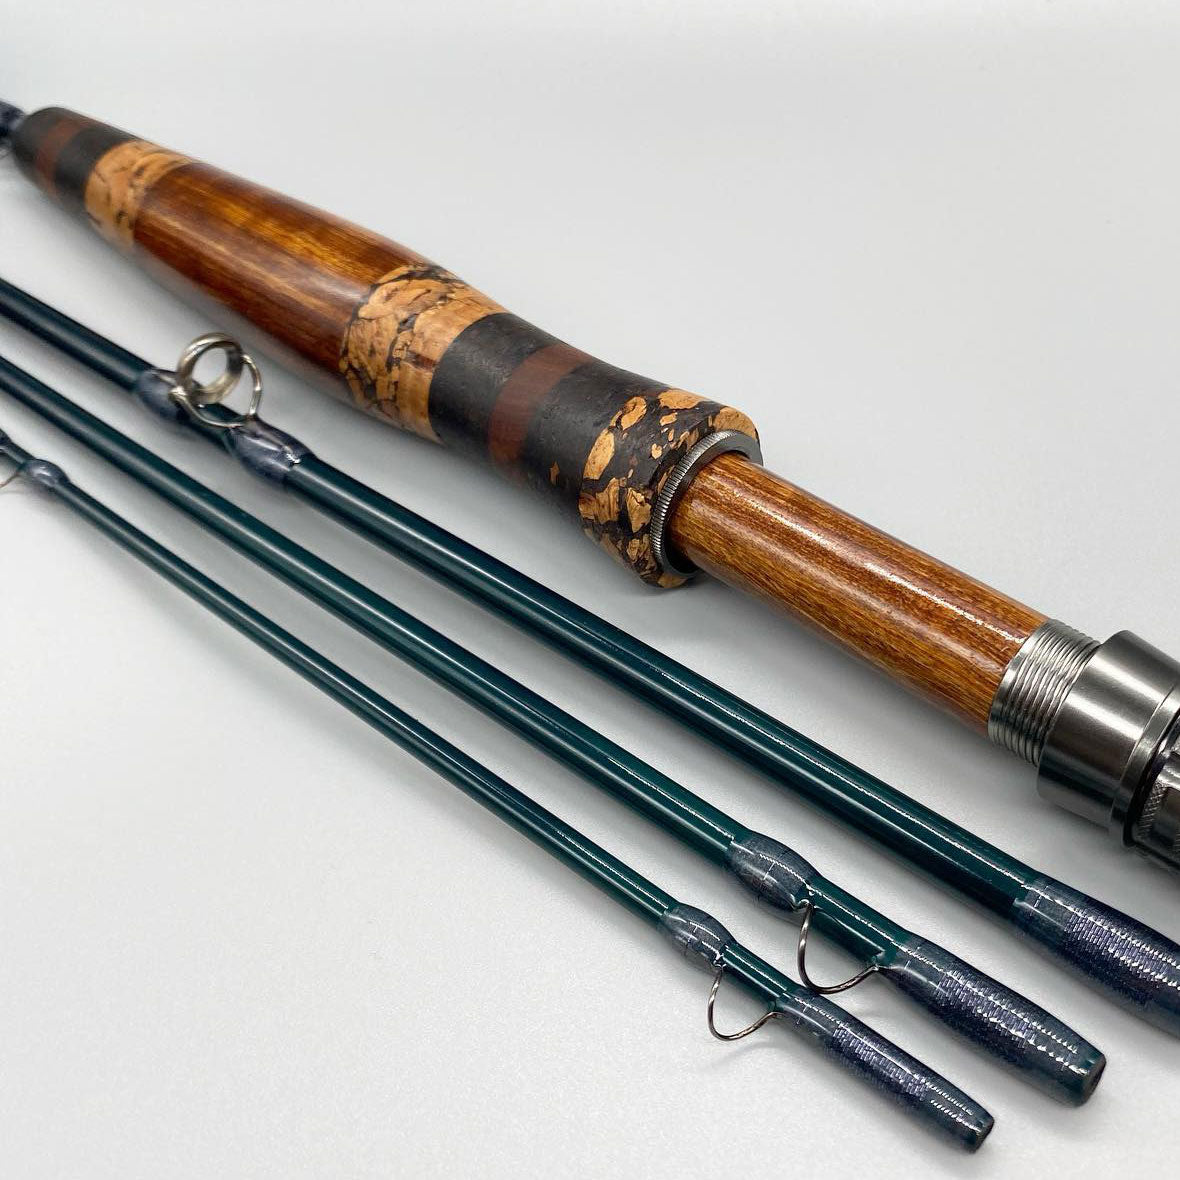 Snake Brand Guides  Best Guides for your Fly Rod – snakeguides